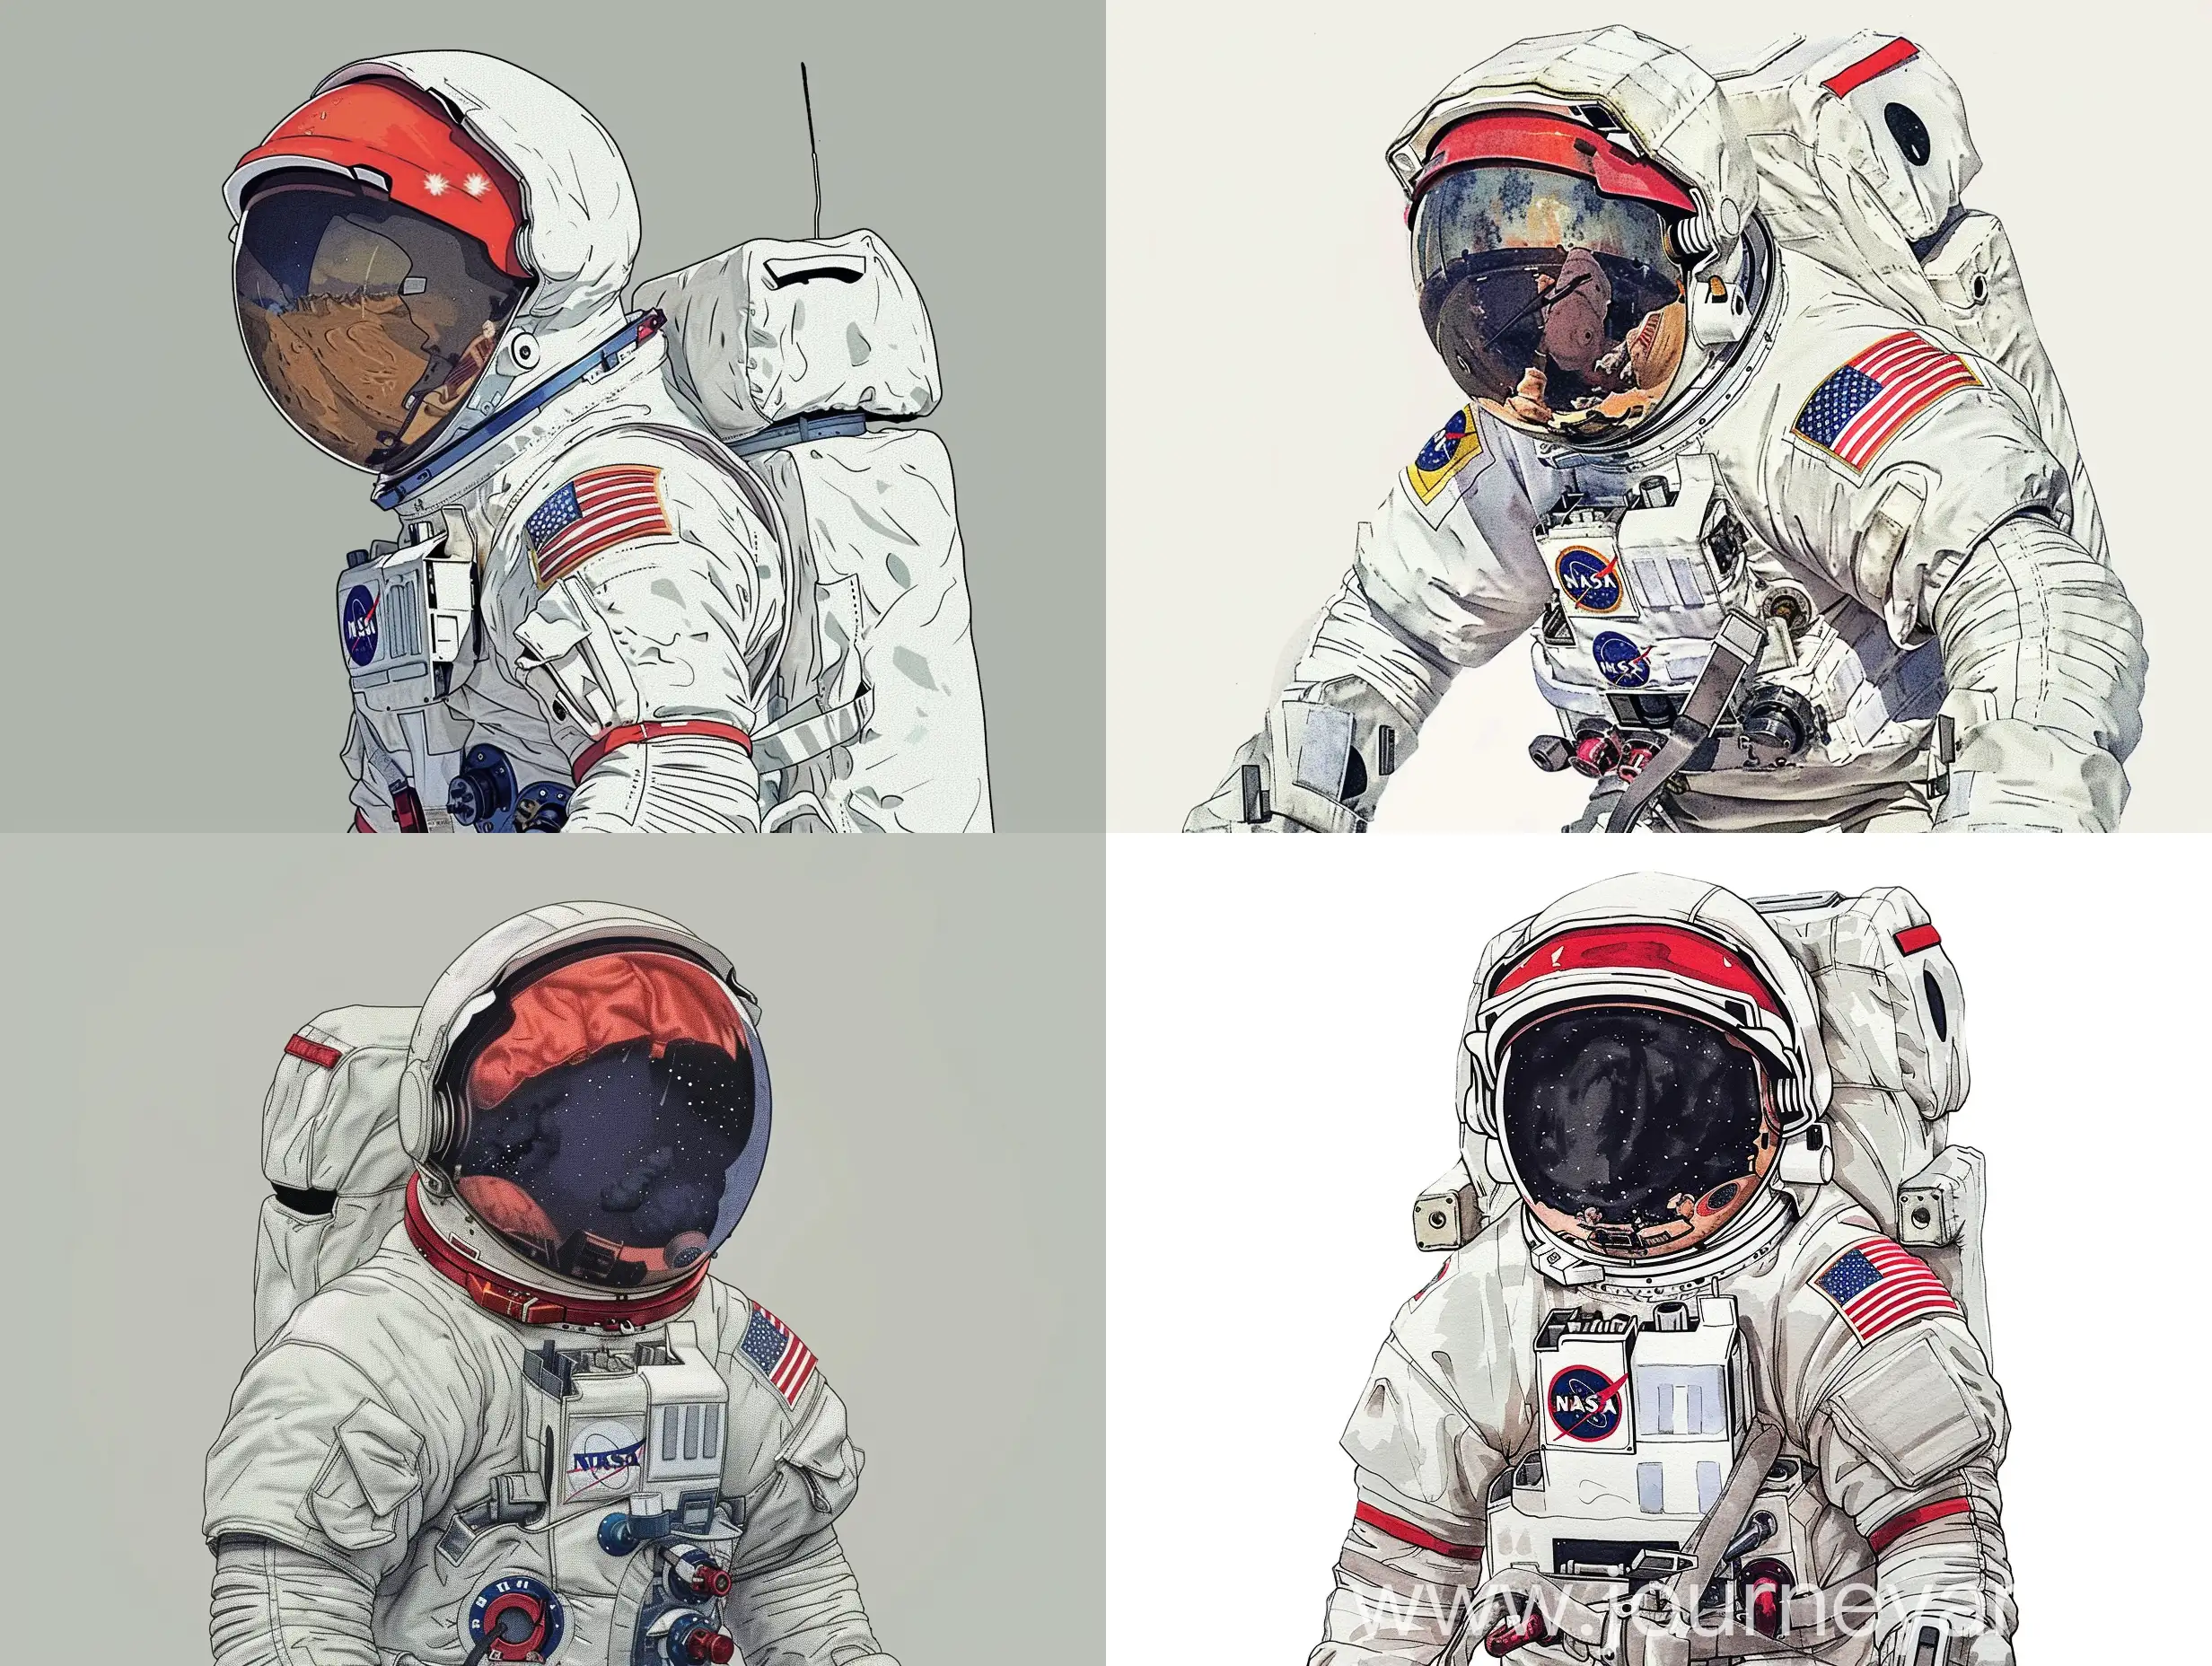 draw an astronaut wearing the typical NASA space suit but with a red helmet.